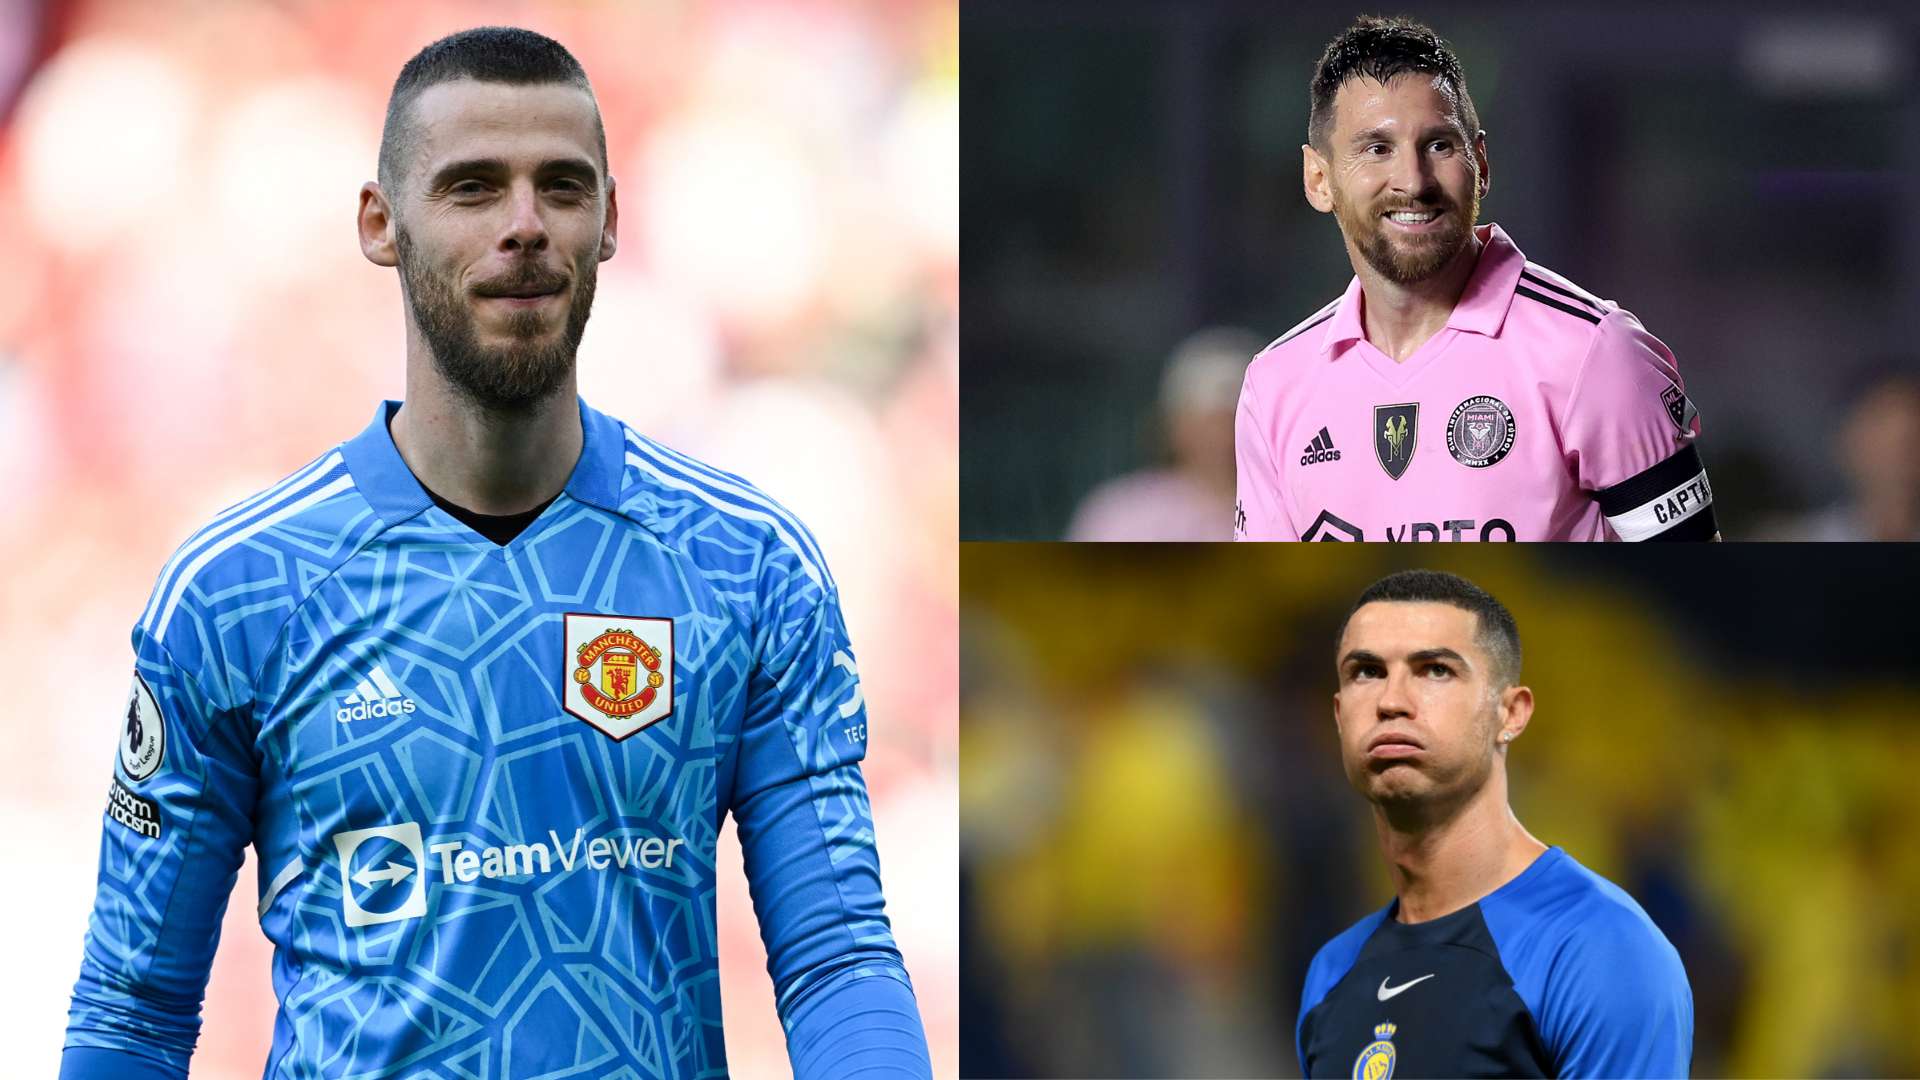 David de Gea may have to choose between playing with Lionel Messi or Cristiano Ronaldo